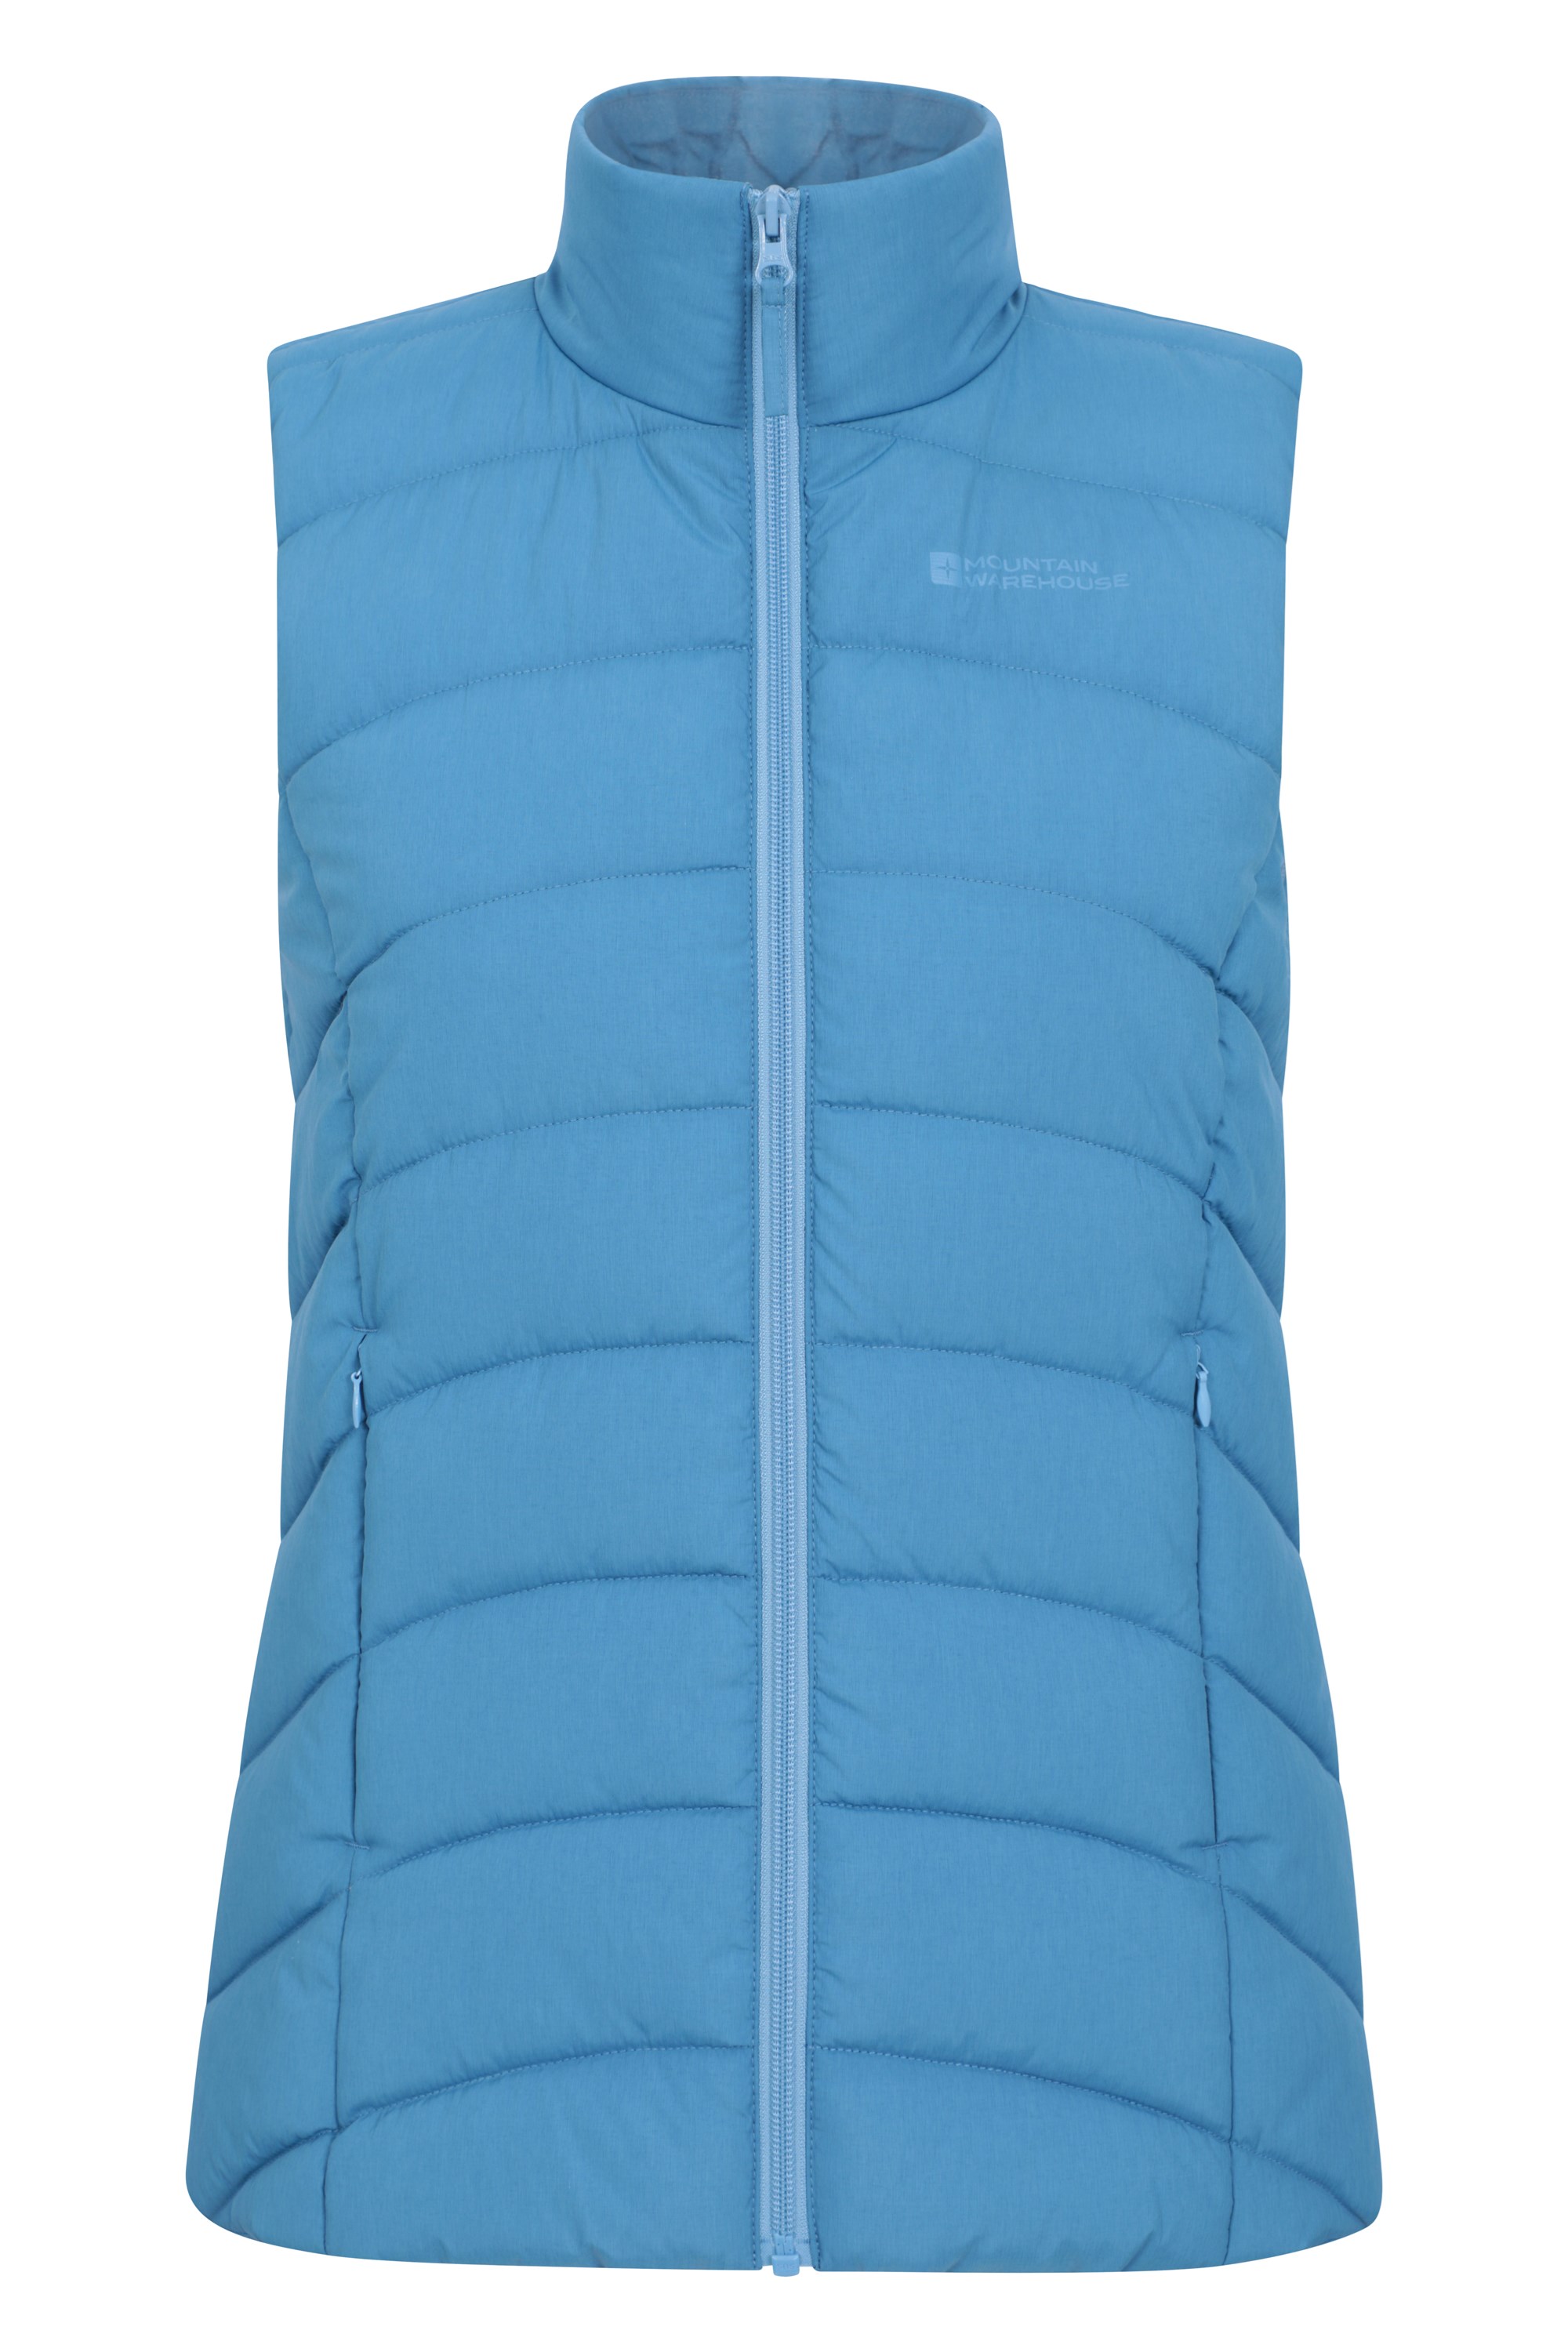 Mountain Warehouse Fern Womens Padded Gilet Adjustable Features 